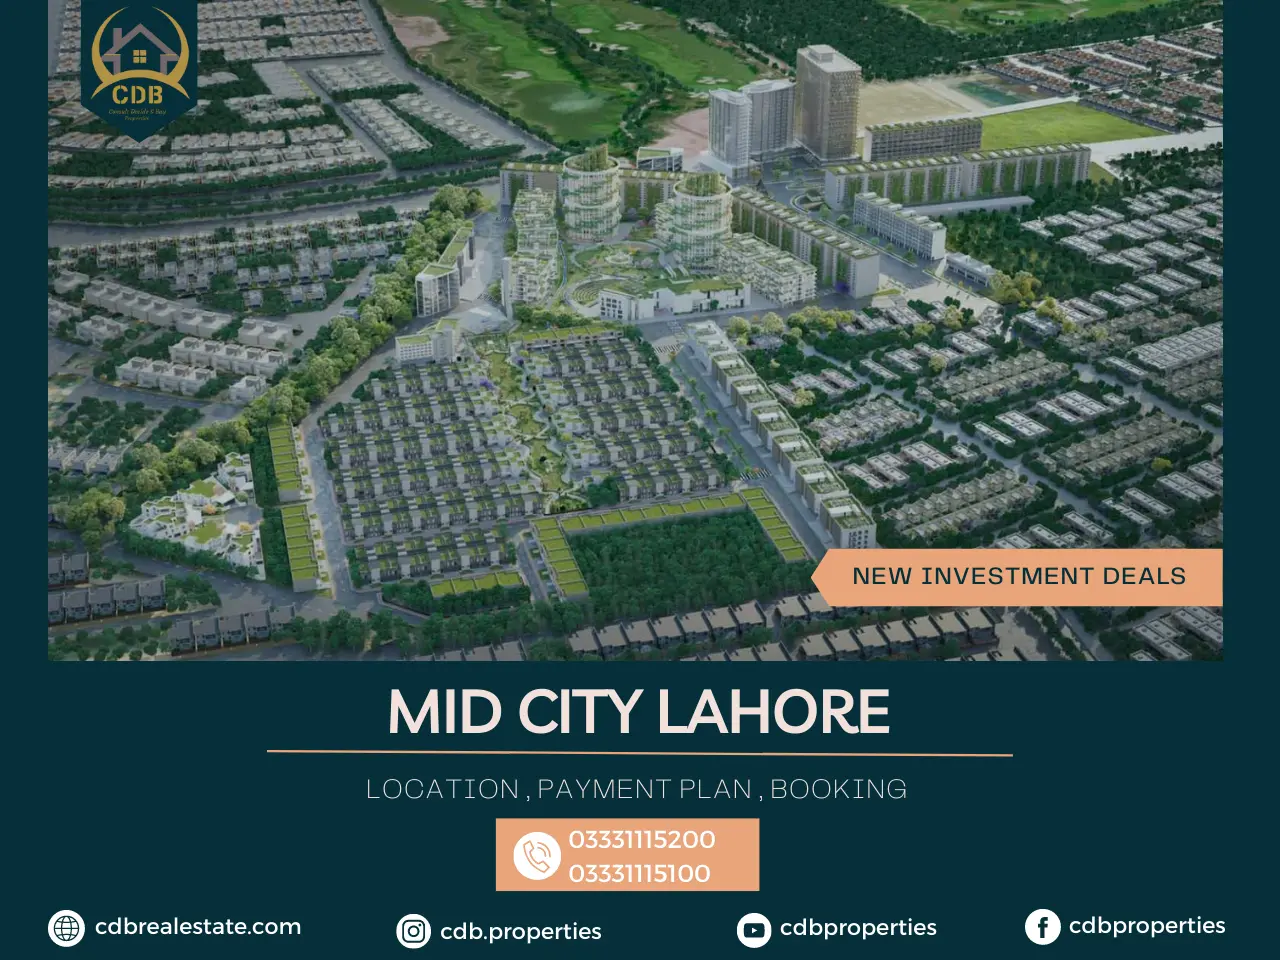 Mid City Lahore -Payment Plan, Investment Deals, Location, Booking